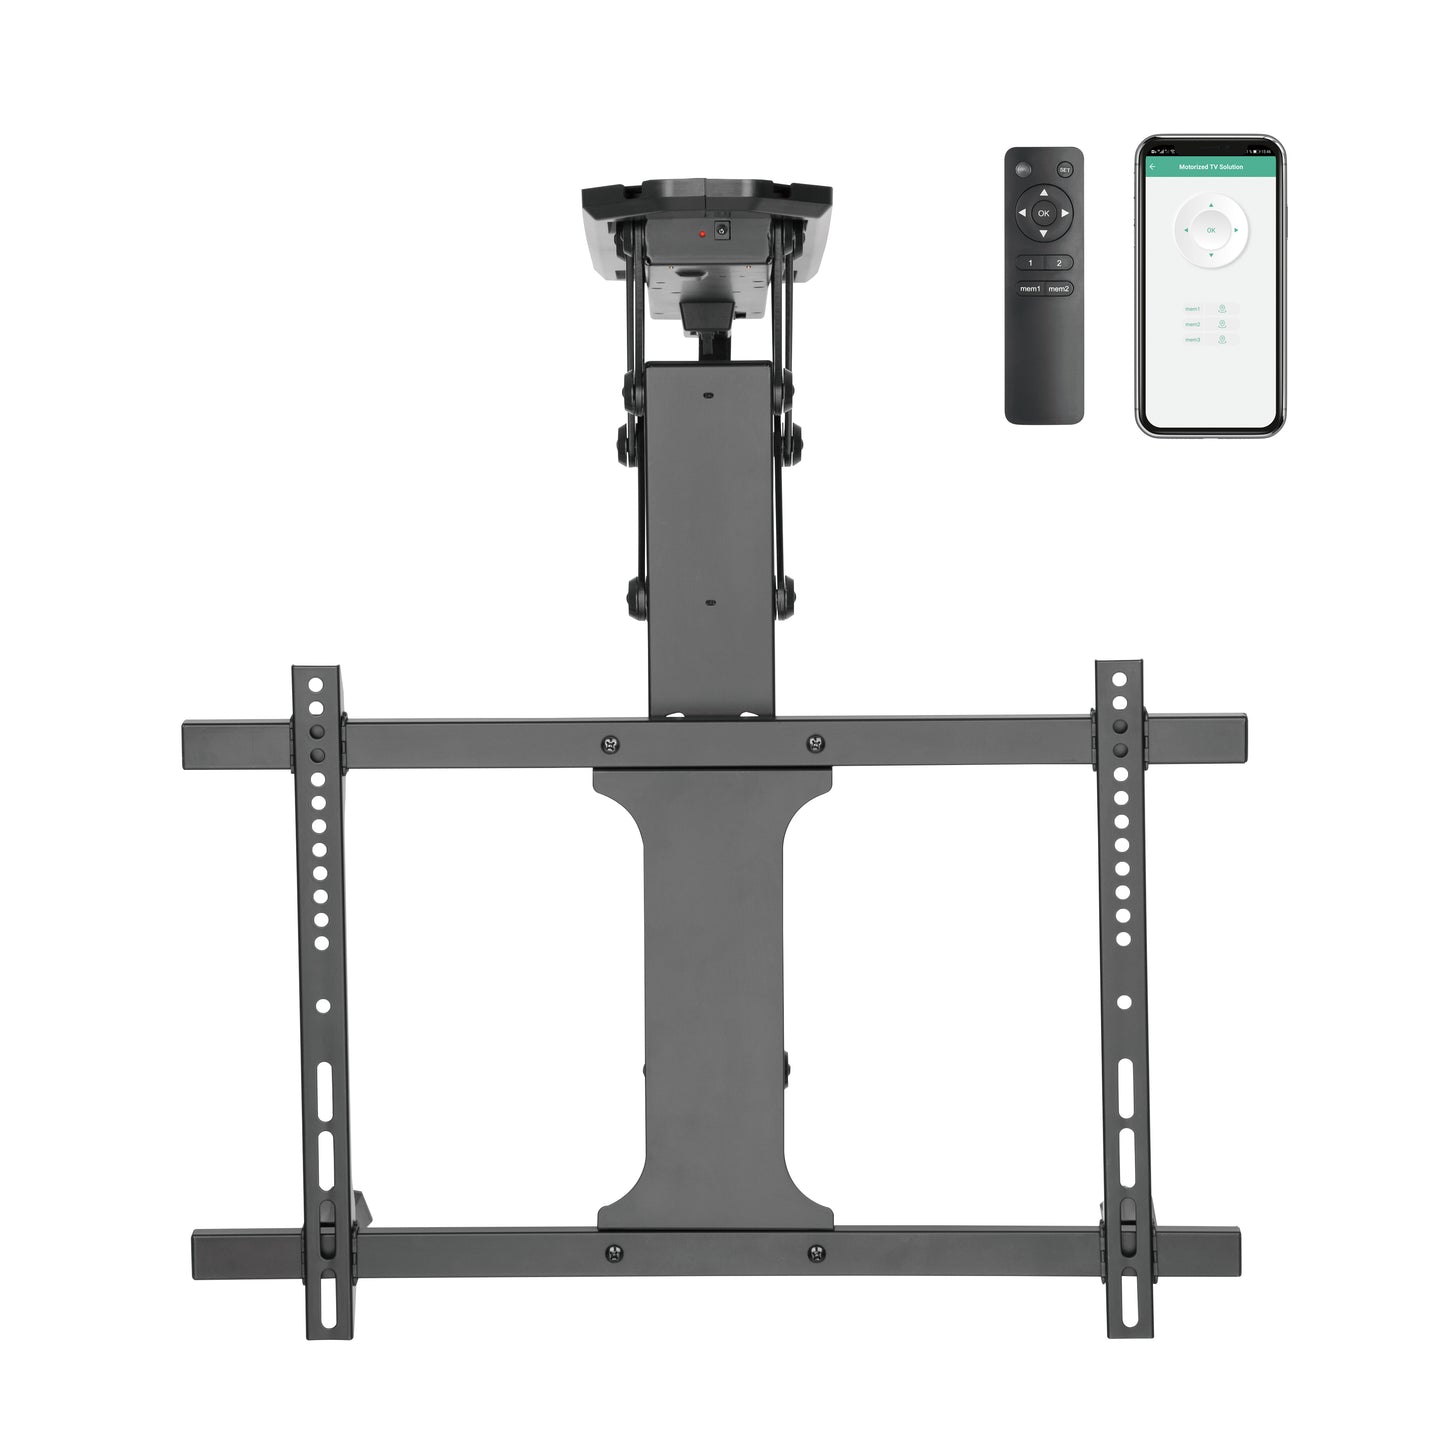 ProMounts Motorized Ceiling TV Mount for TVs 32" - 70" Up to 77 lbs with Smart App